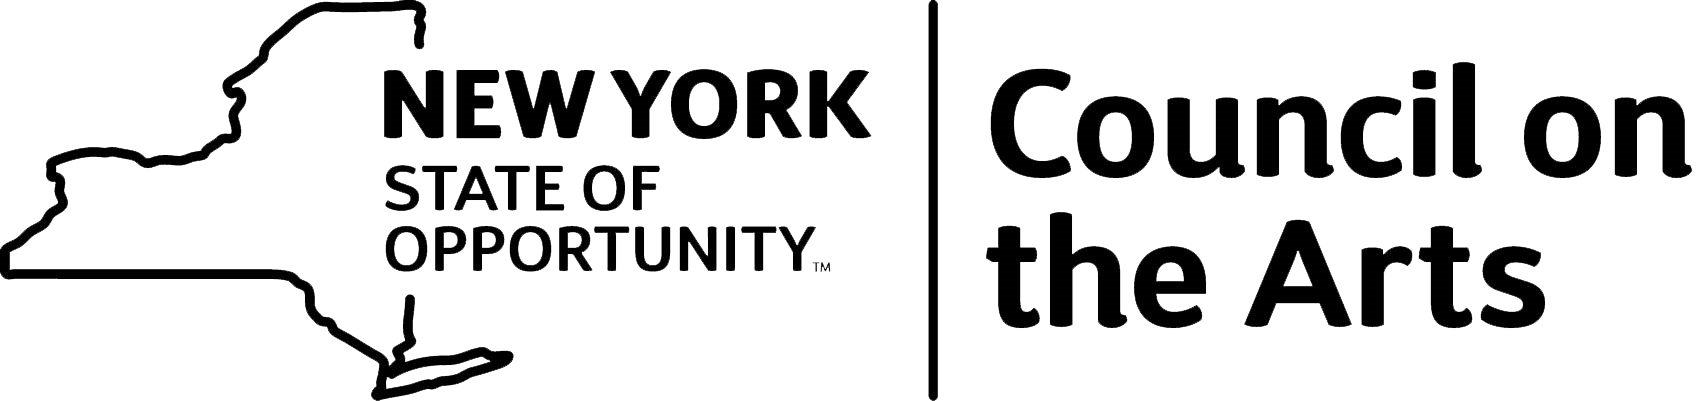 The New York State Council on the Arts with the support of Governor Andrew Cuomo and the New York Legislature